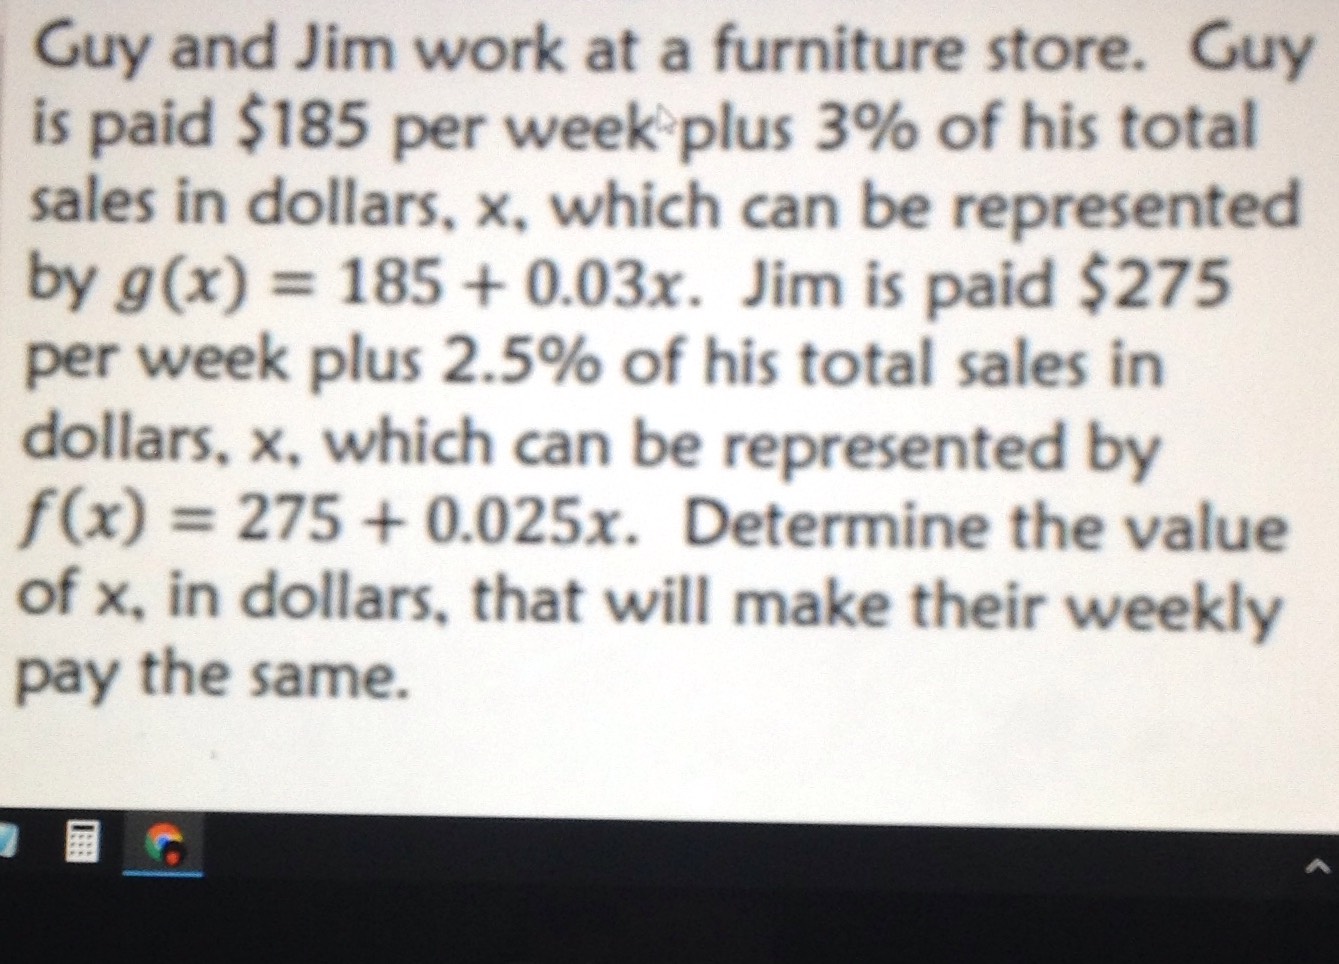 Guy and Jim work at a furniture store. Guy is paid...